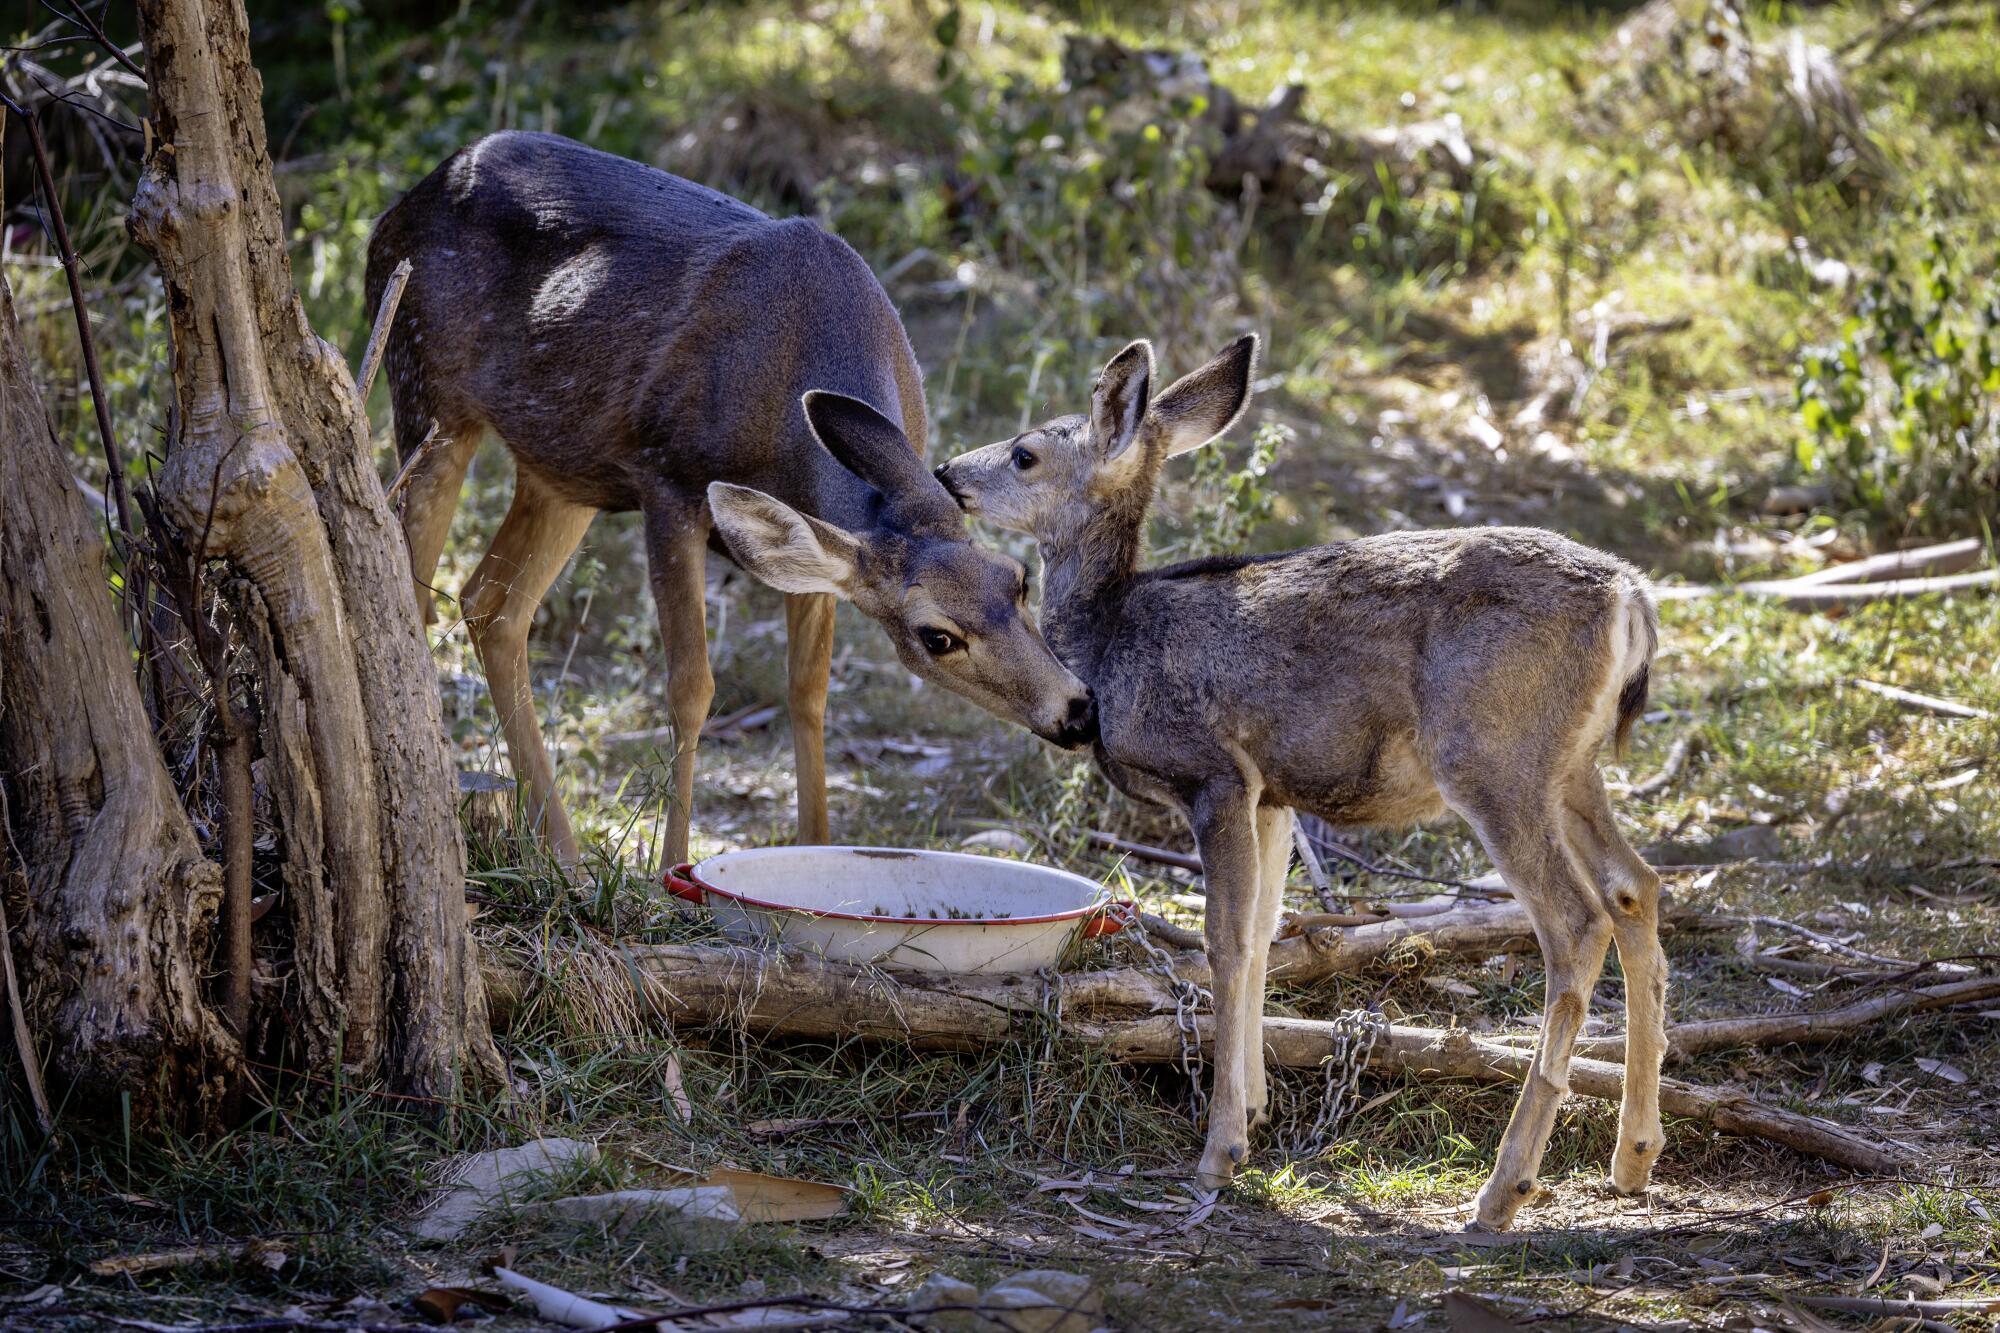     A mule deer licks a child on Catalina Island.